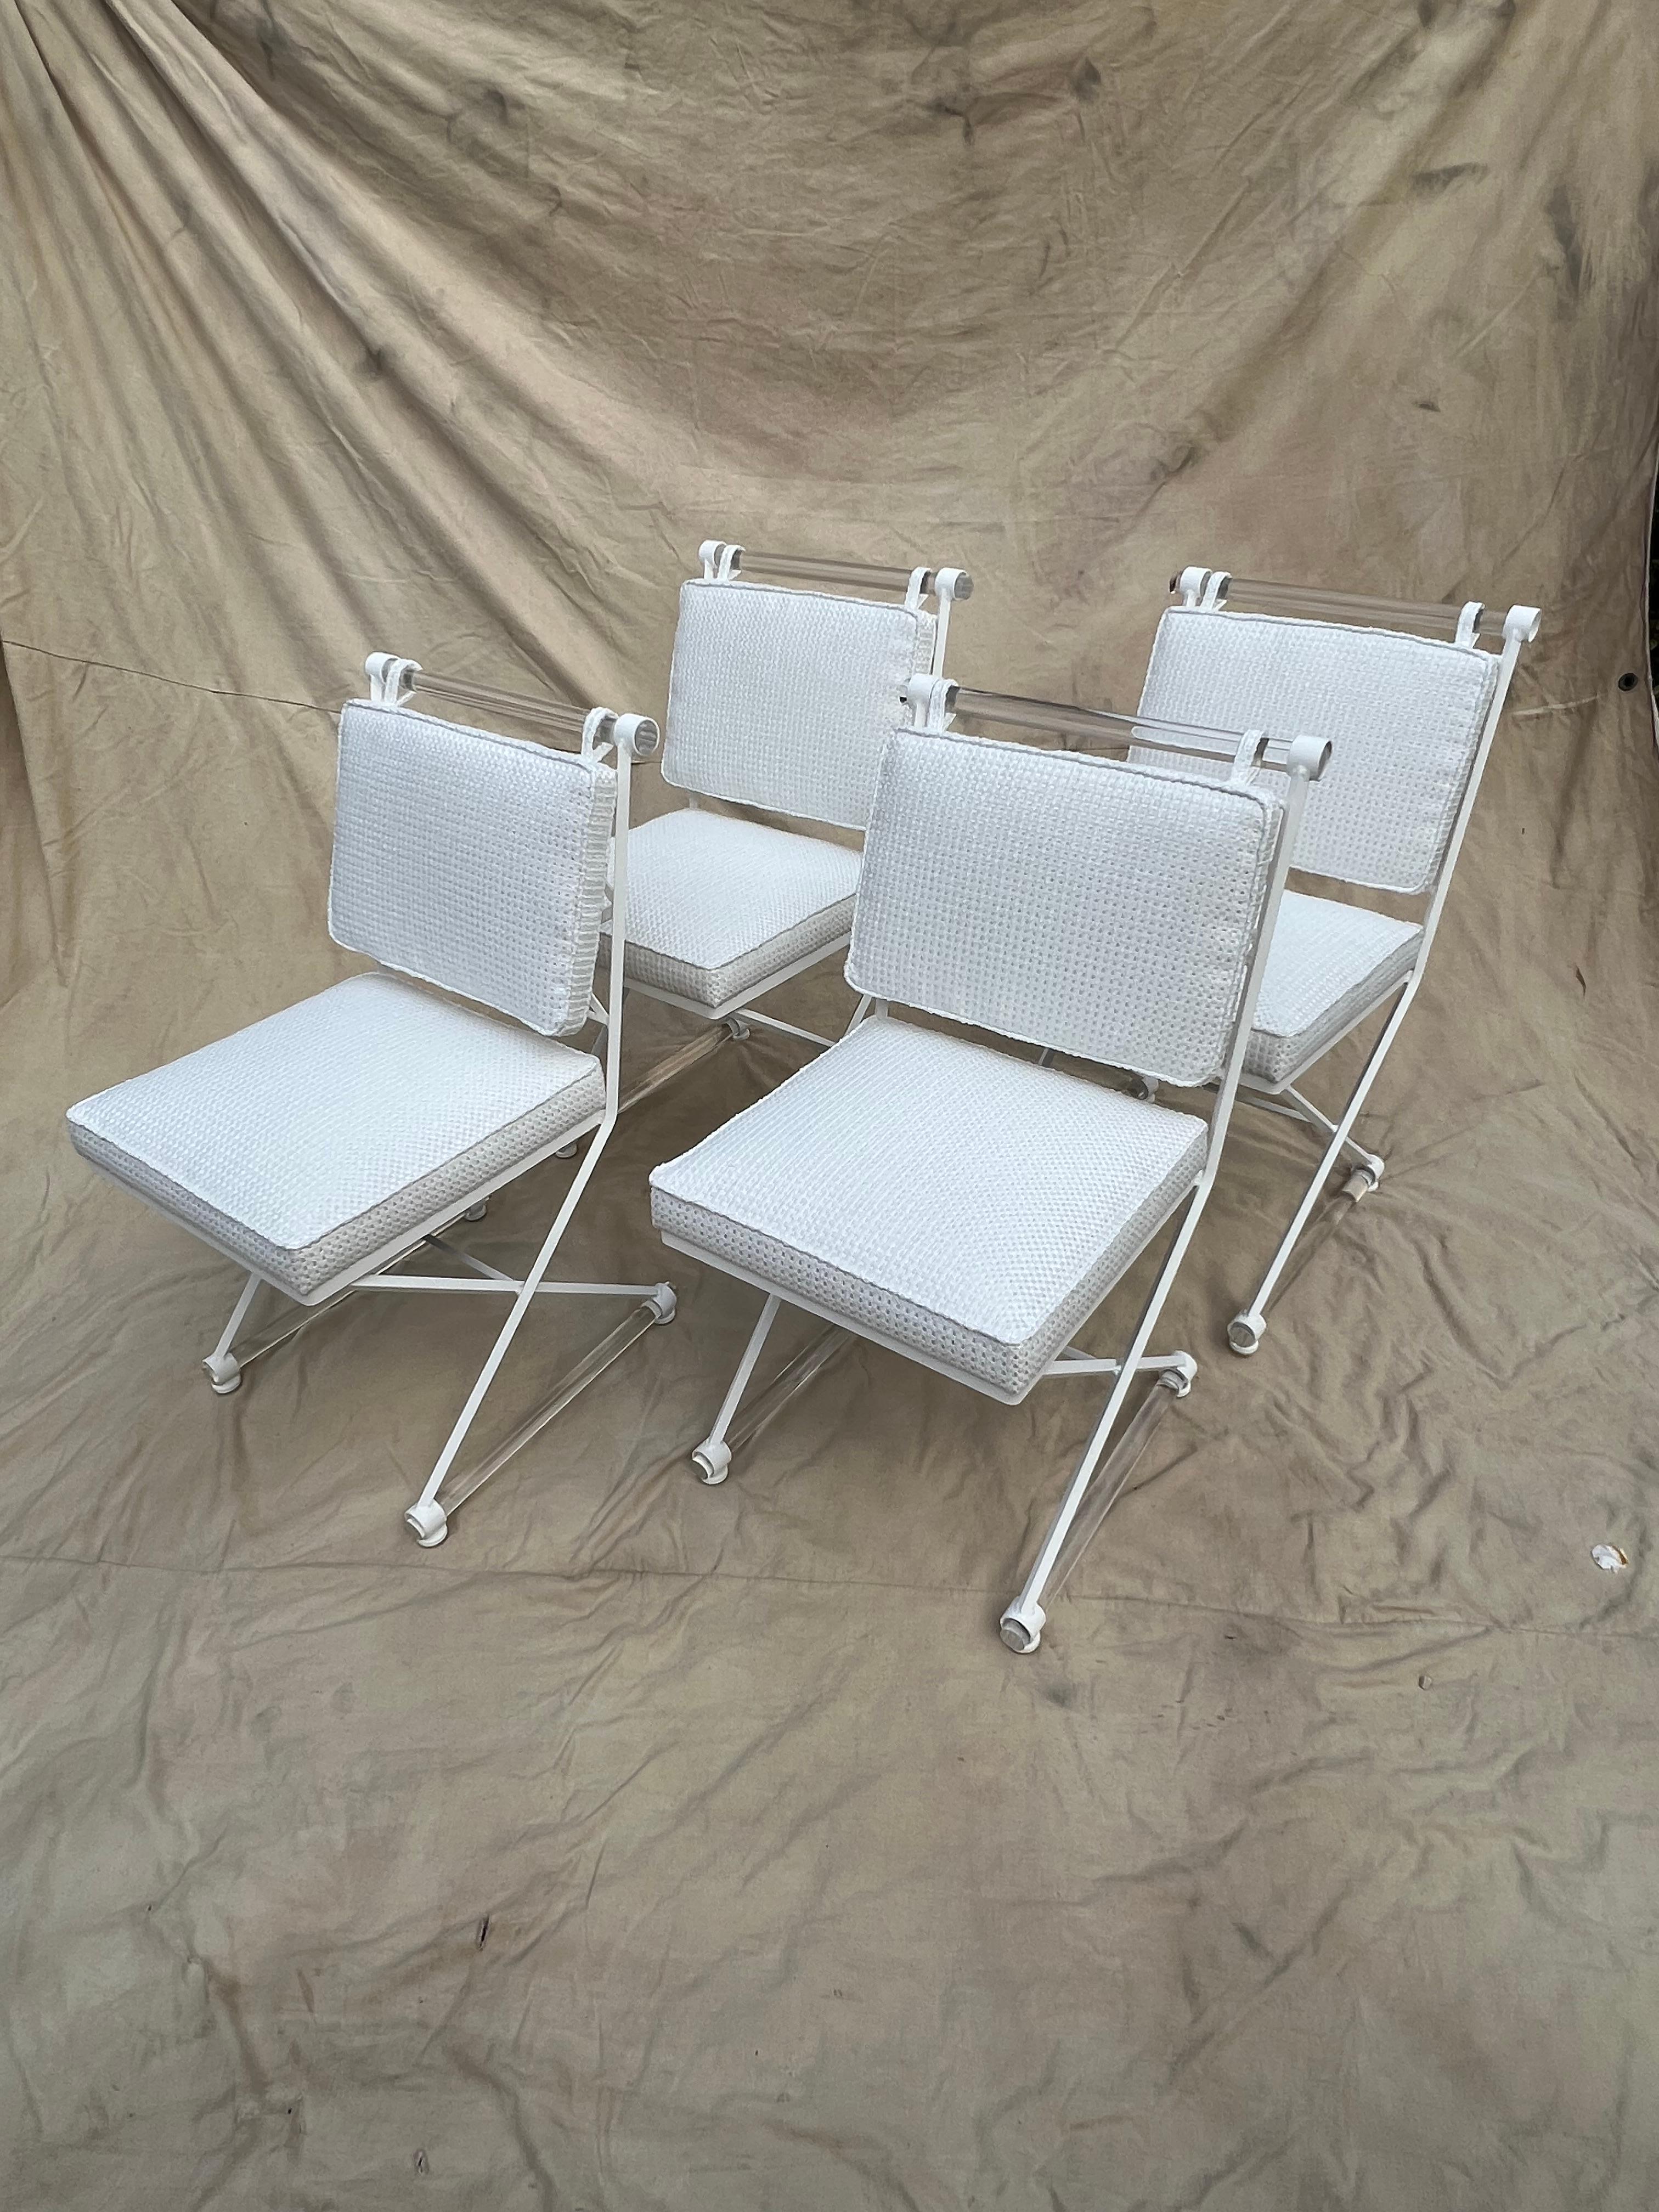 Metal Cleo Baldon X-Form Chairs Restored with Acrylic Dowels and Sunbrella Upholstery For Sale